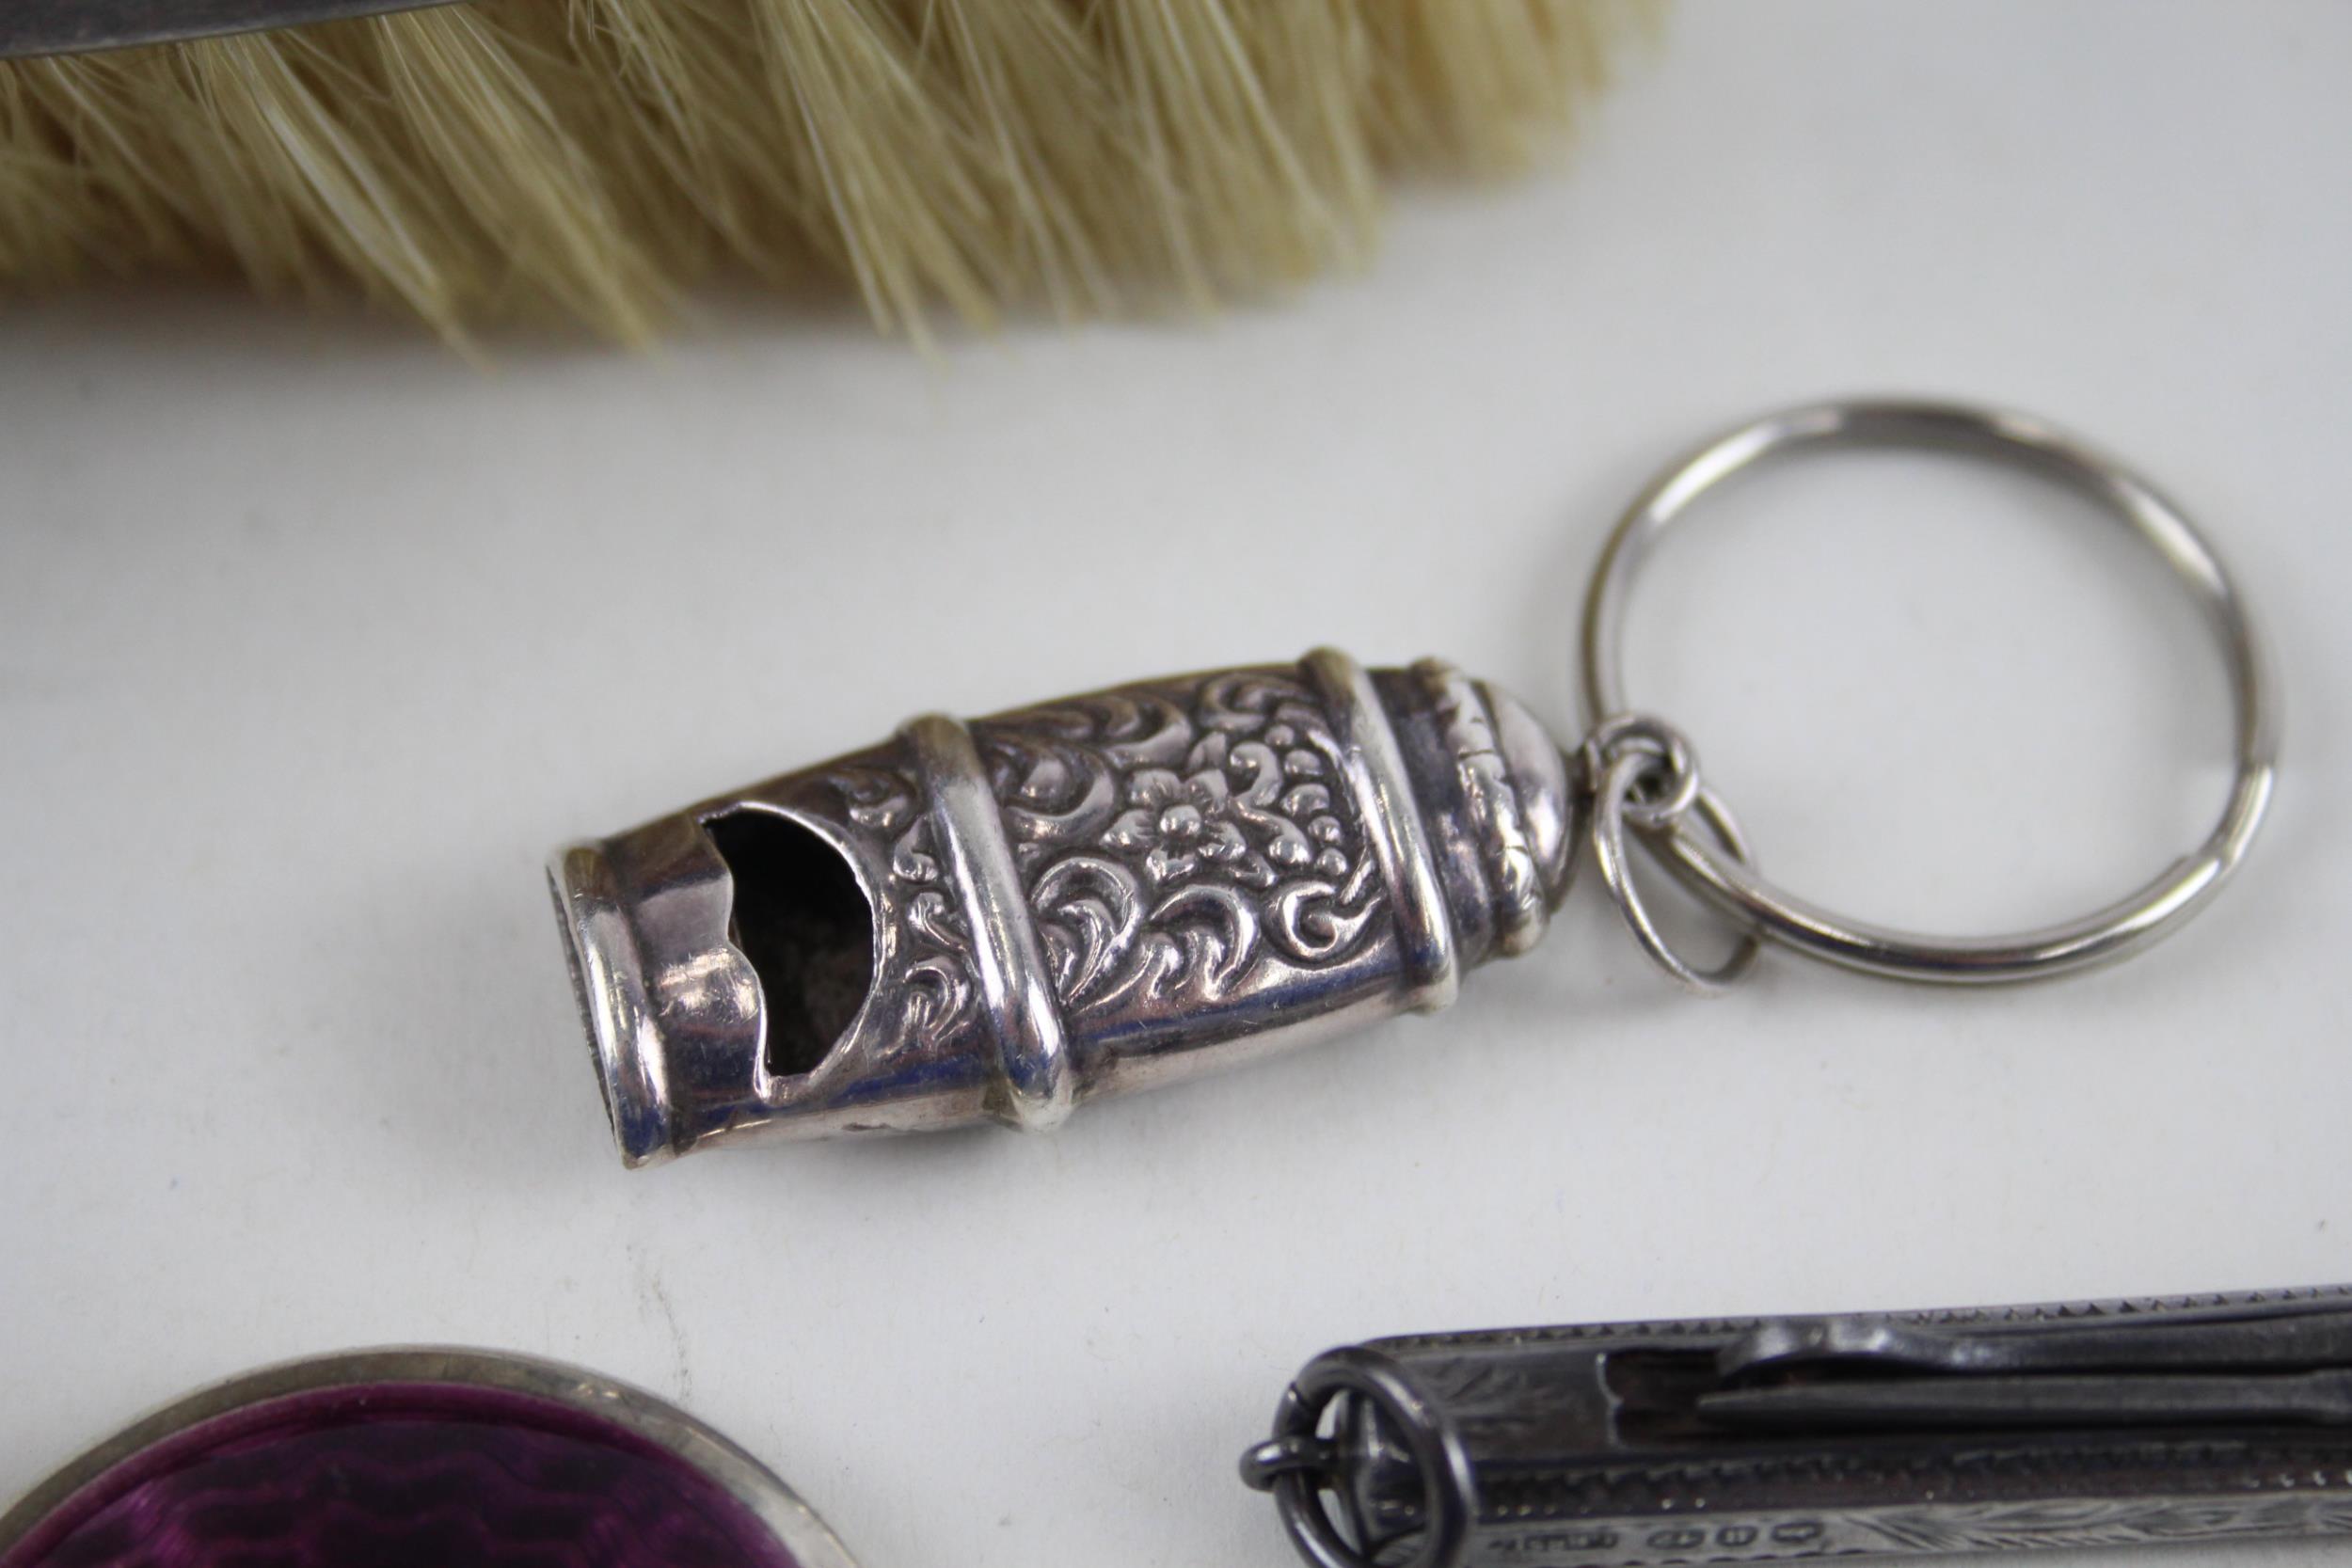 7 x Antique / Vintage Hallmarked .925 STERLING SILVER Vanity (147g) - Inc Guilloche Enamel, Whistle, - Image 7 of 7